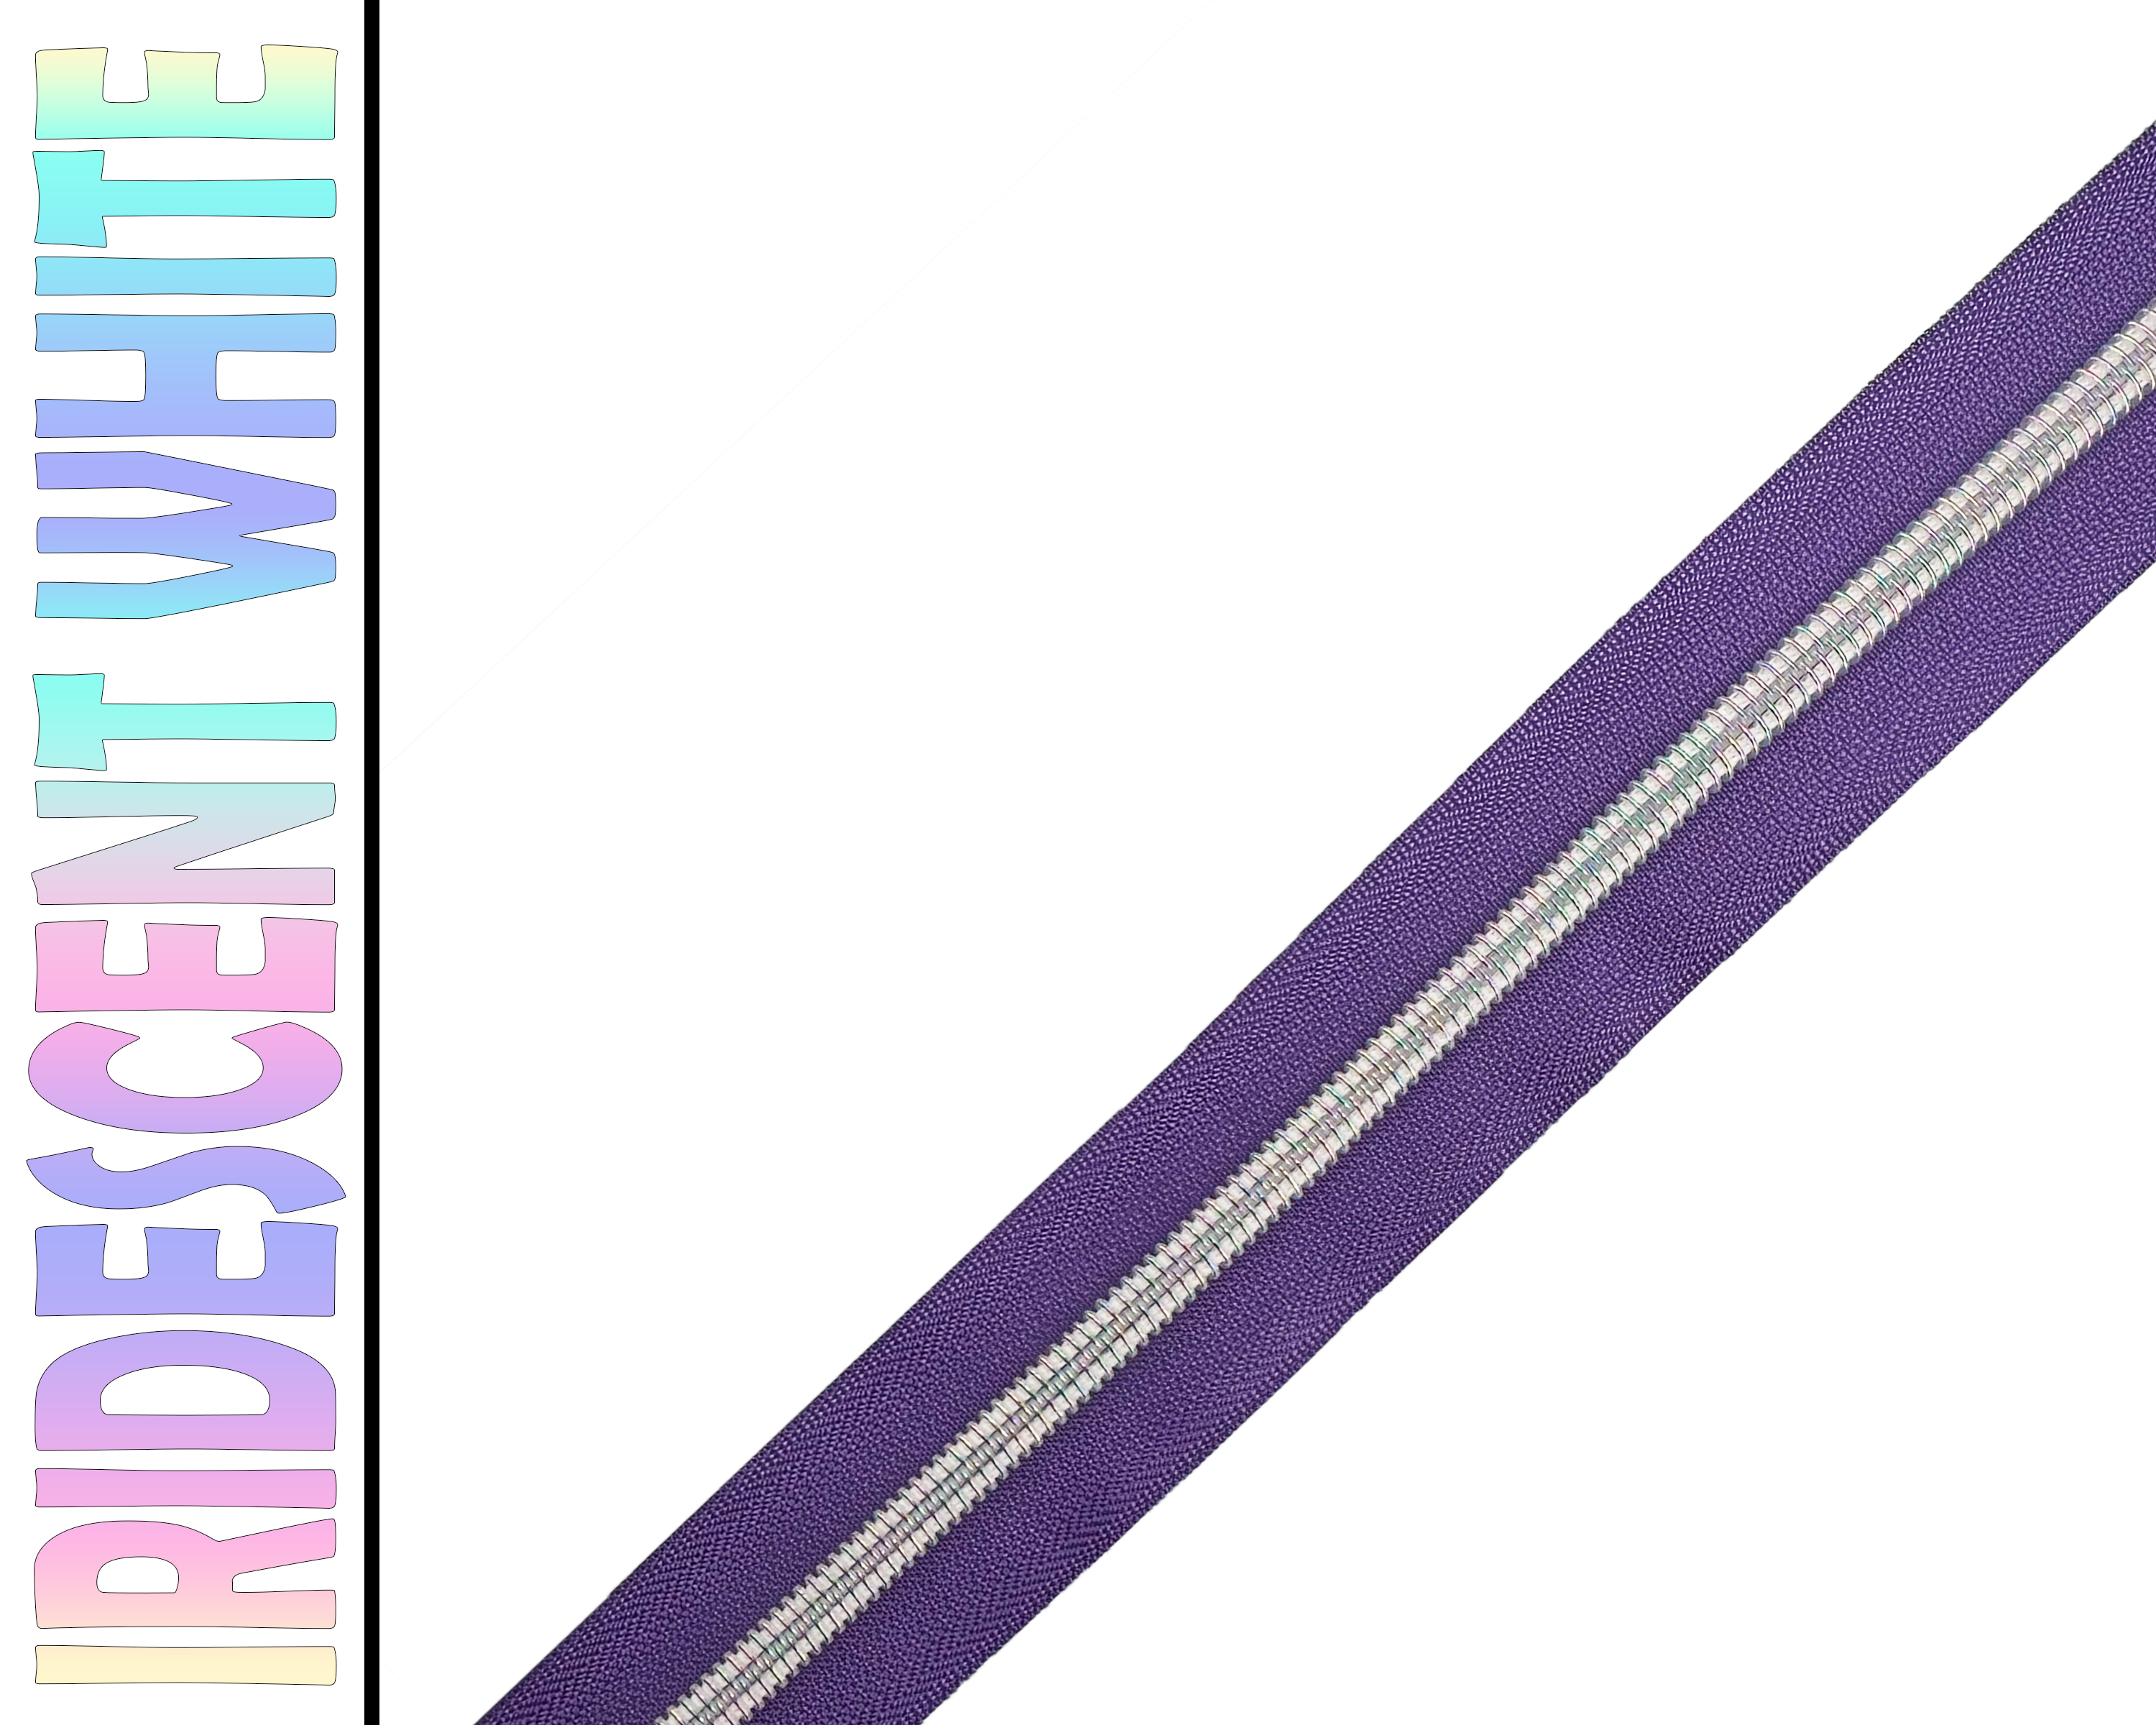 Deep Purple Zipper Tape, Size 5 Nylon Coil with various coloured teeth